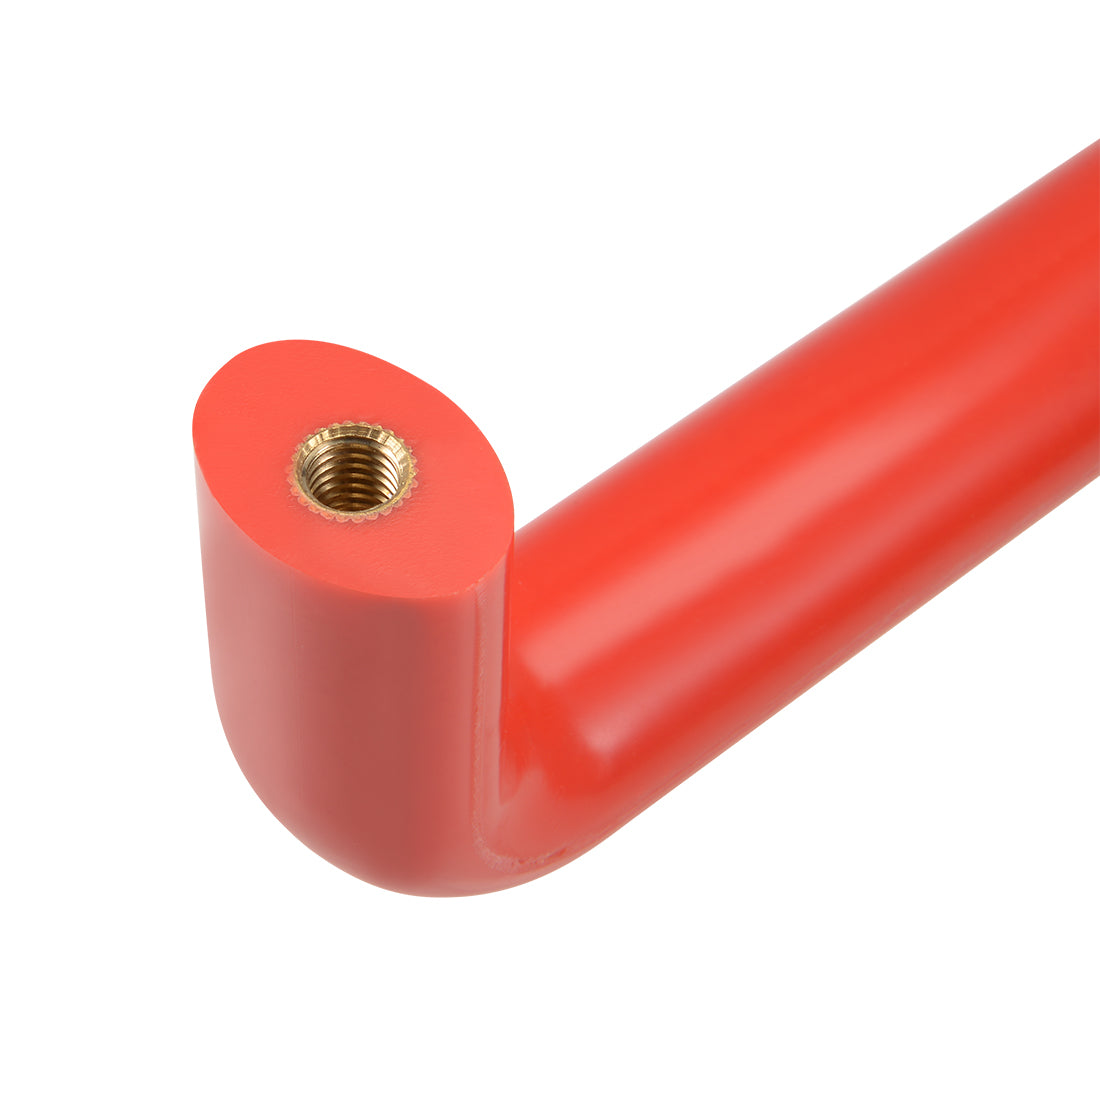 uxcell Uxcell Bakelite Plastic Pulls Handle 120mm Hole Centers Red for Industrial Machine 2Pcs